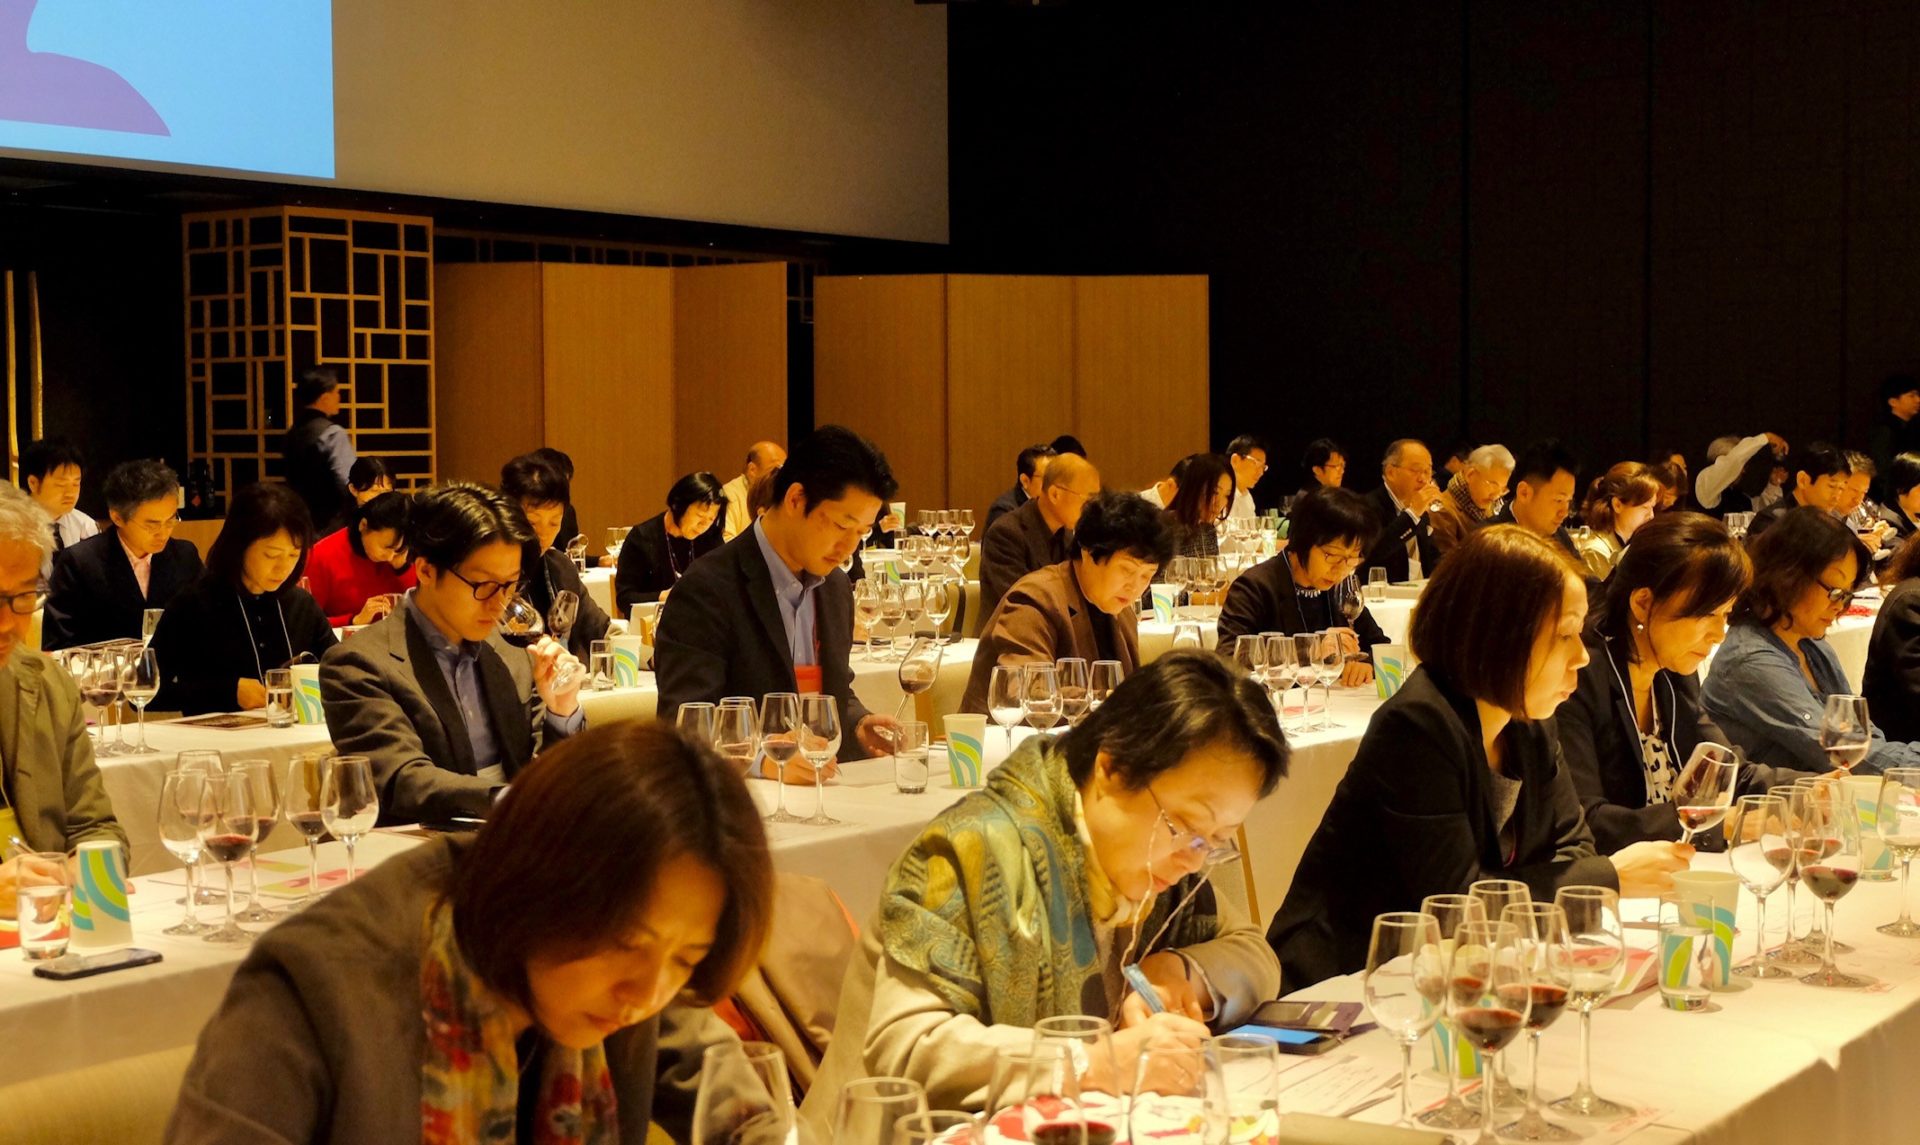 Rioja wines touch down in Japan